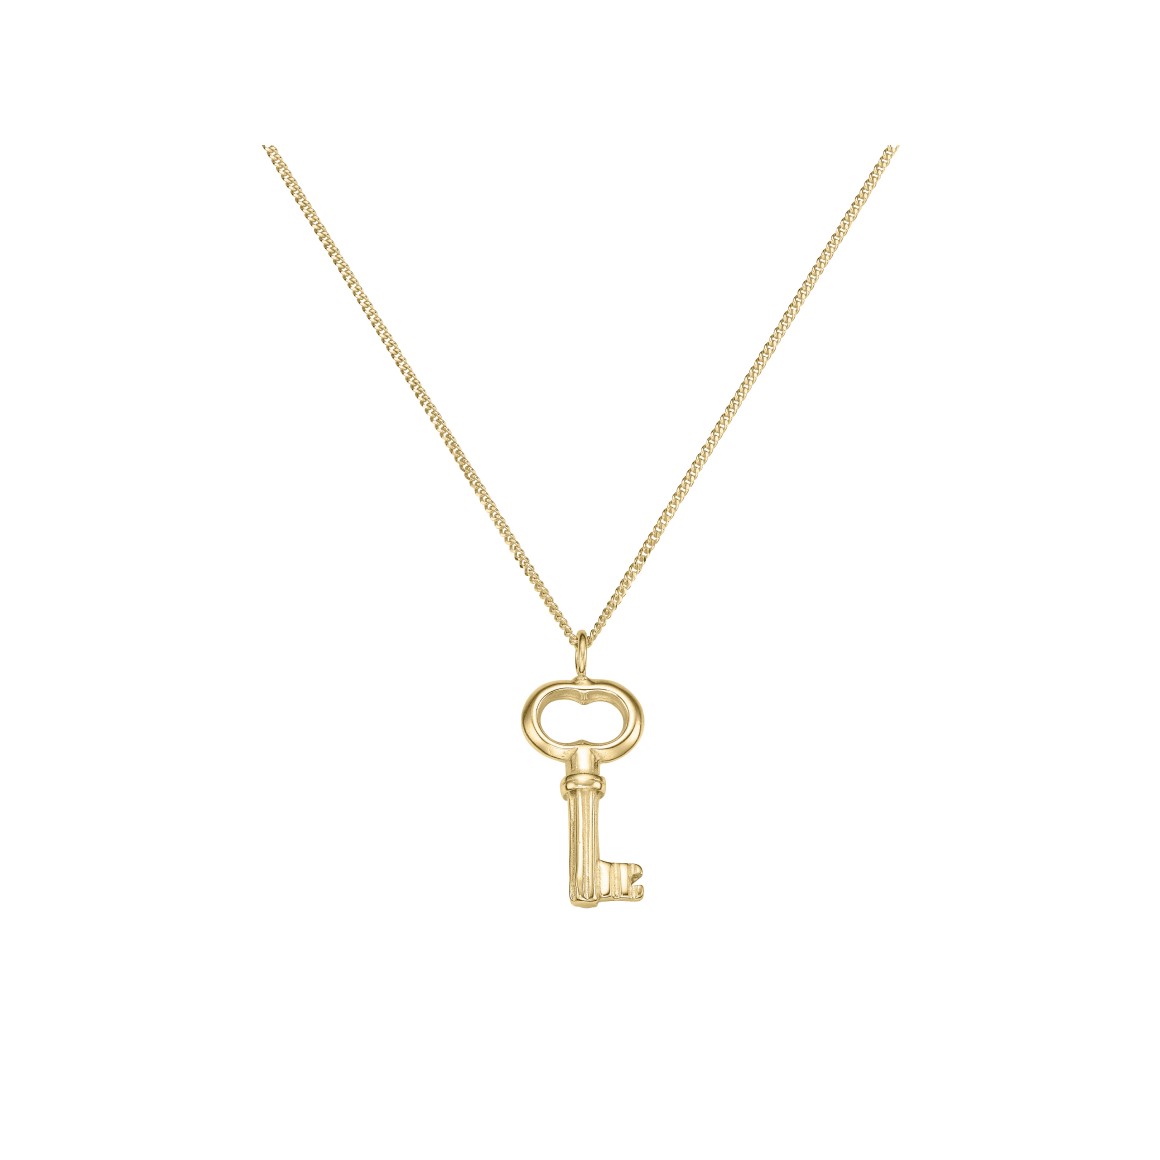 ladies key necklace sterling silver gold-plated